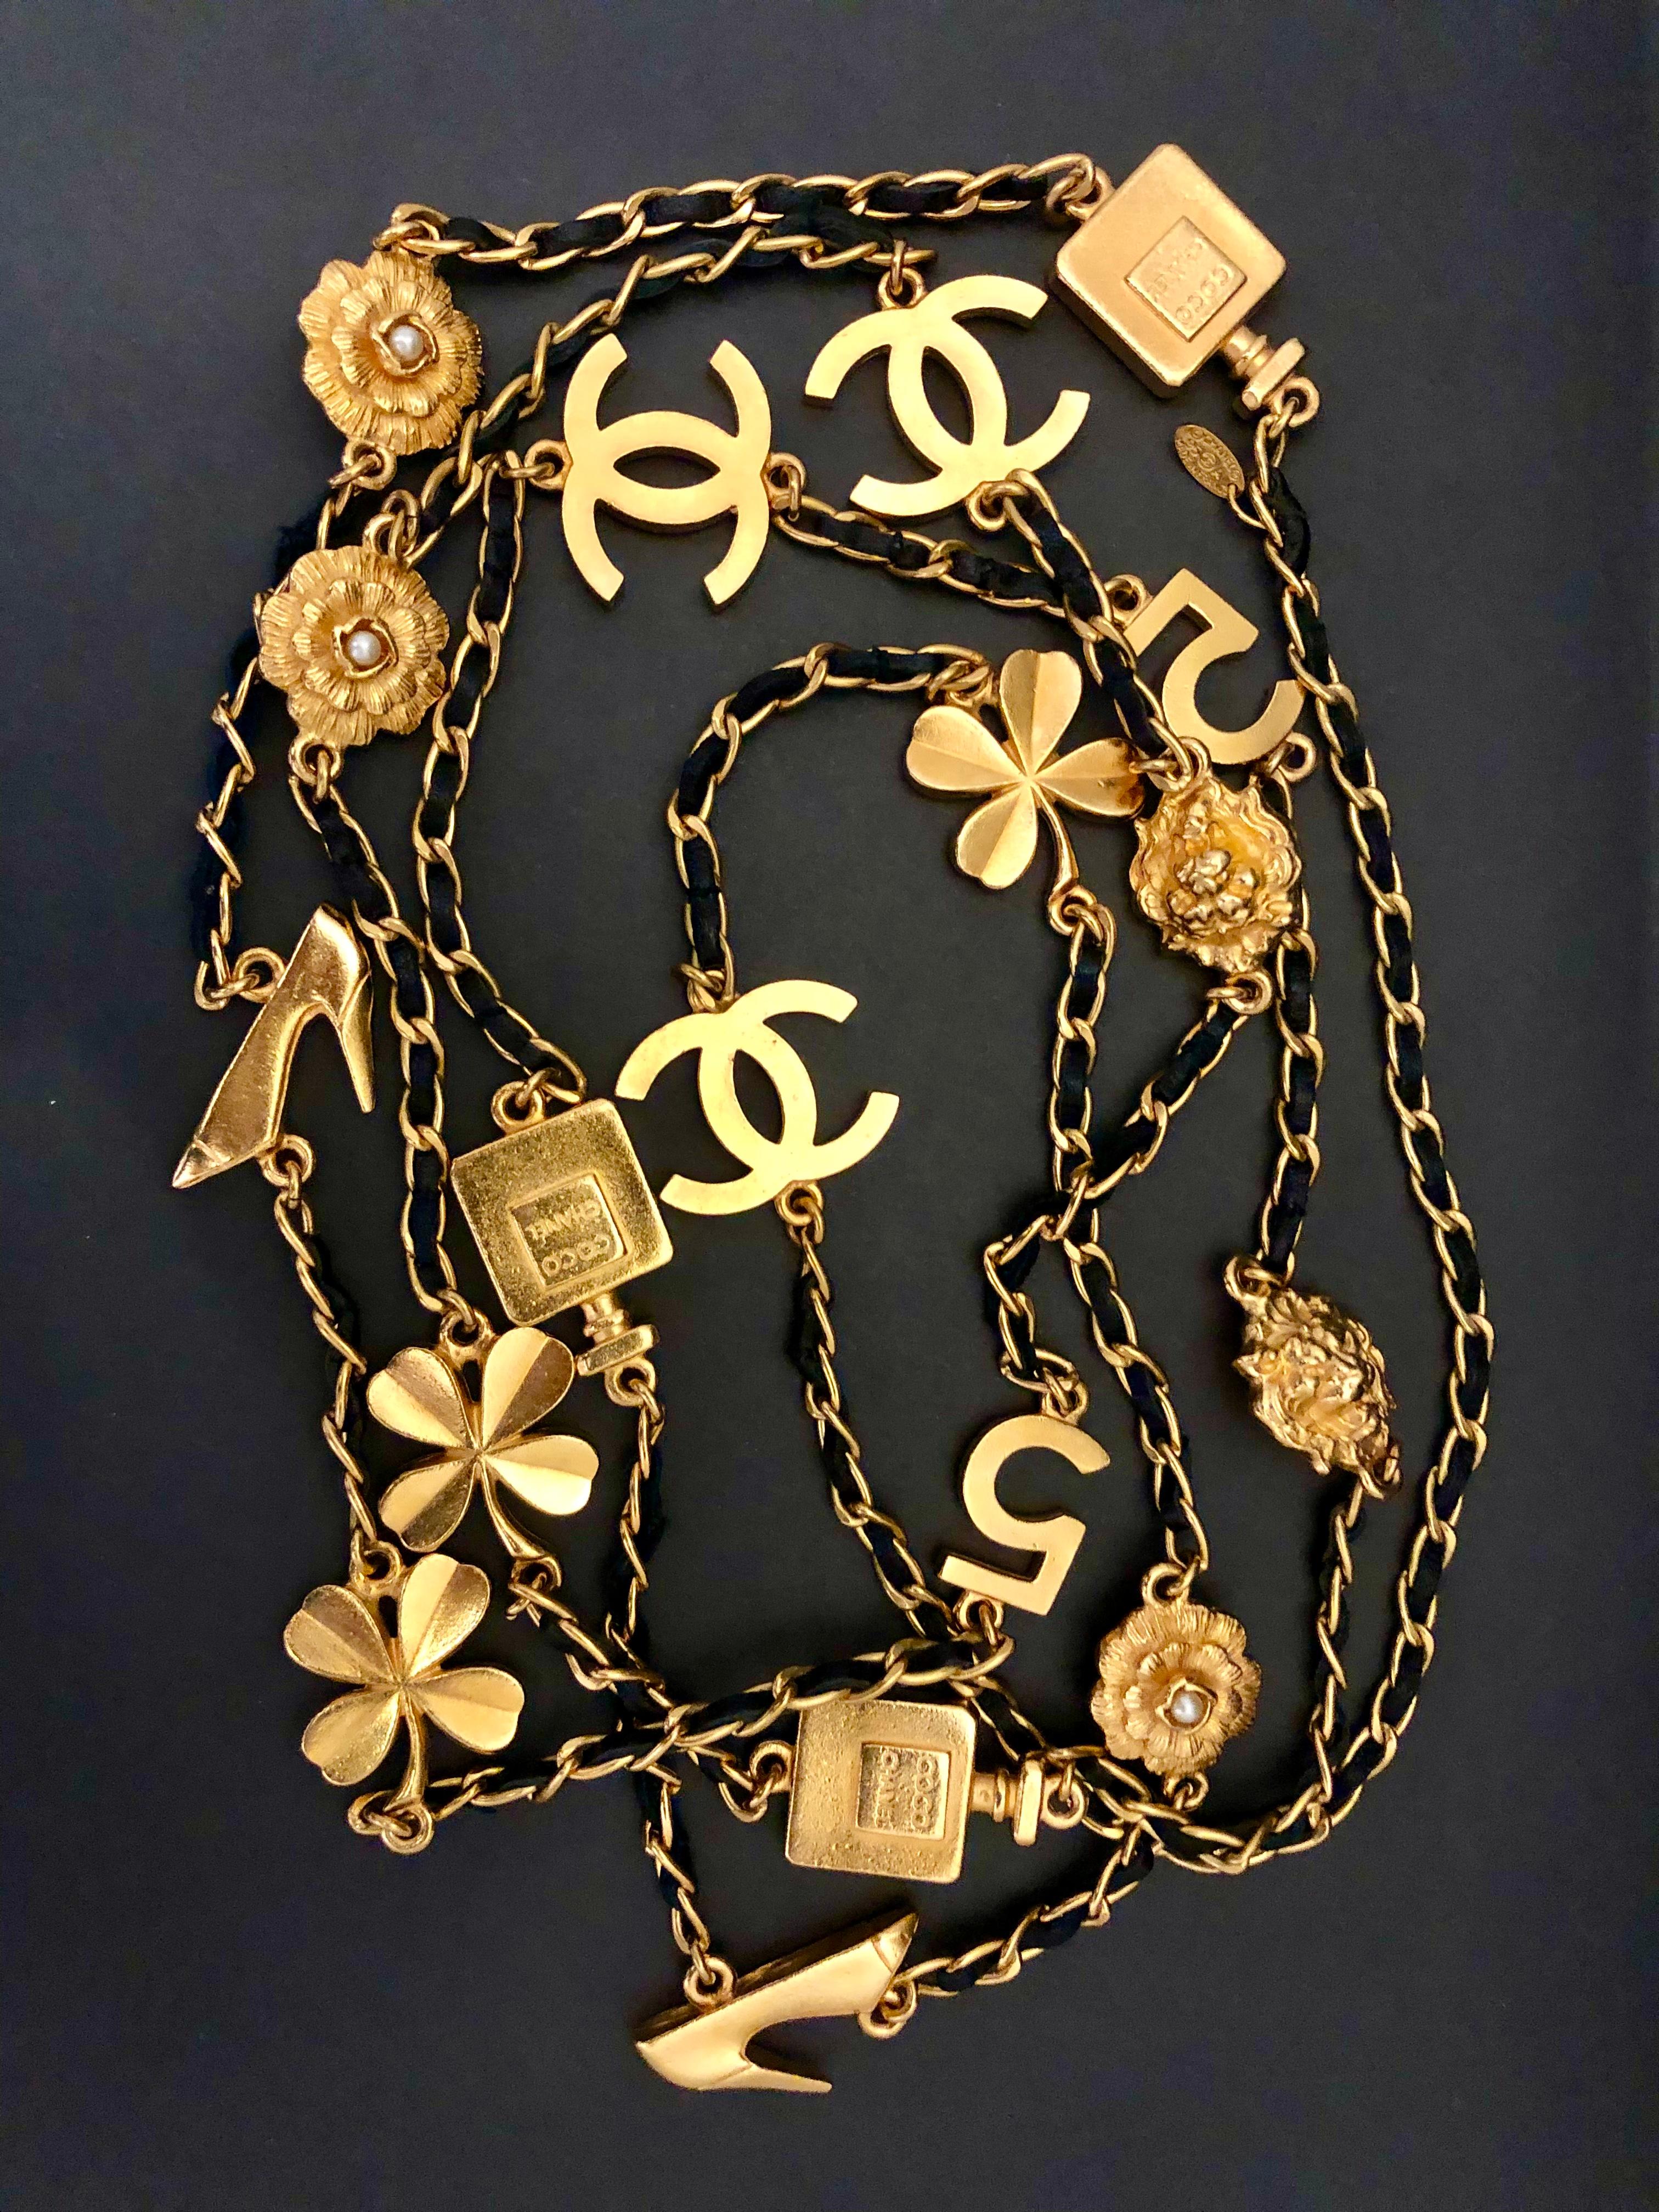 This vintage CHANEL long chain necklace is crafted of gold toned chain interlaced with black leather featuring 18 Chanel’s iconic CC Camellia No.5 Clover Lion motifs. Slip on style. Stamped Chanel 95A made in France. Measures approximately 190 cm in